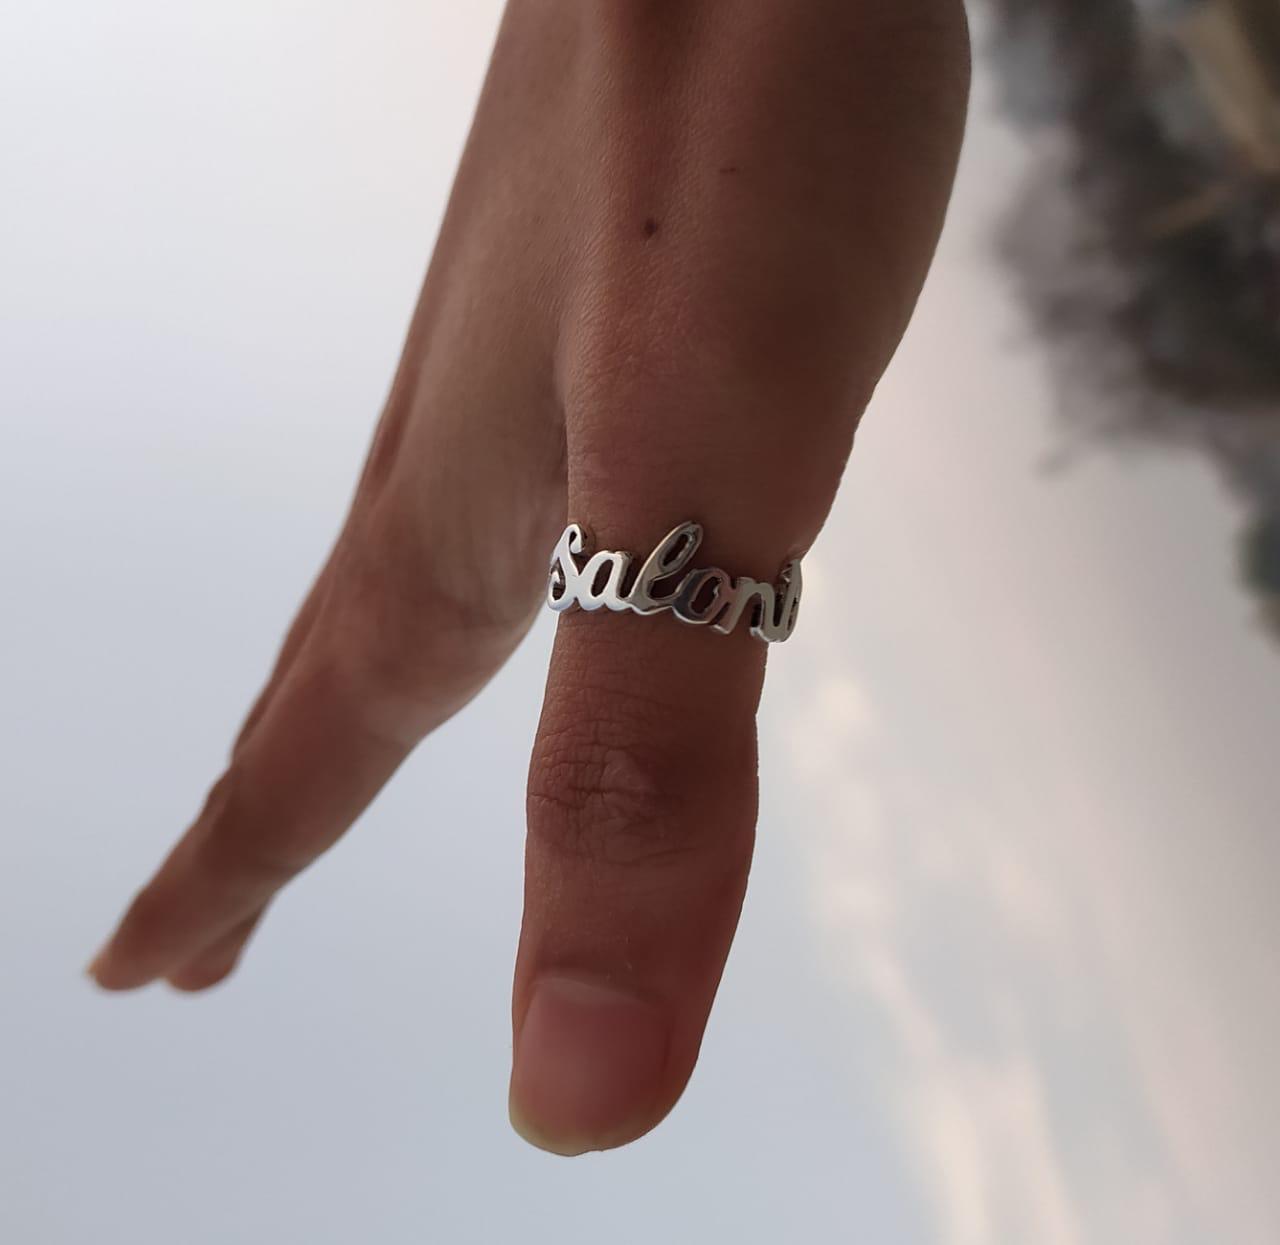 Personalized Name Ring Hand Stamped | kandsimpressions